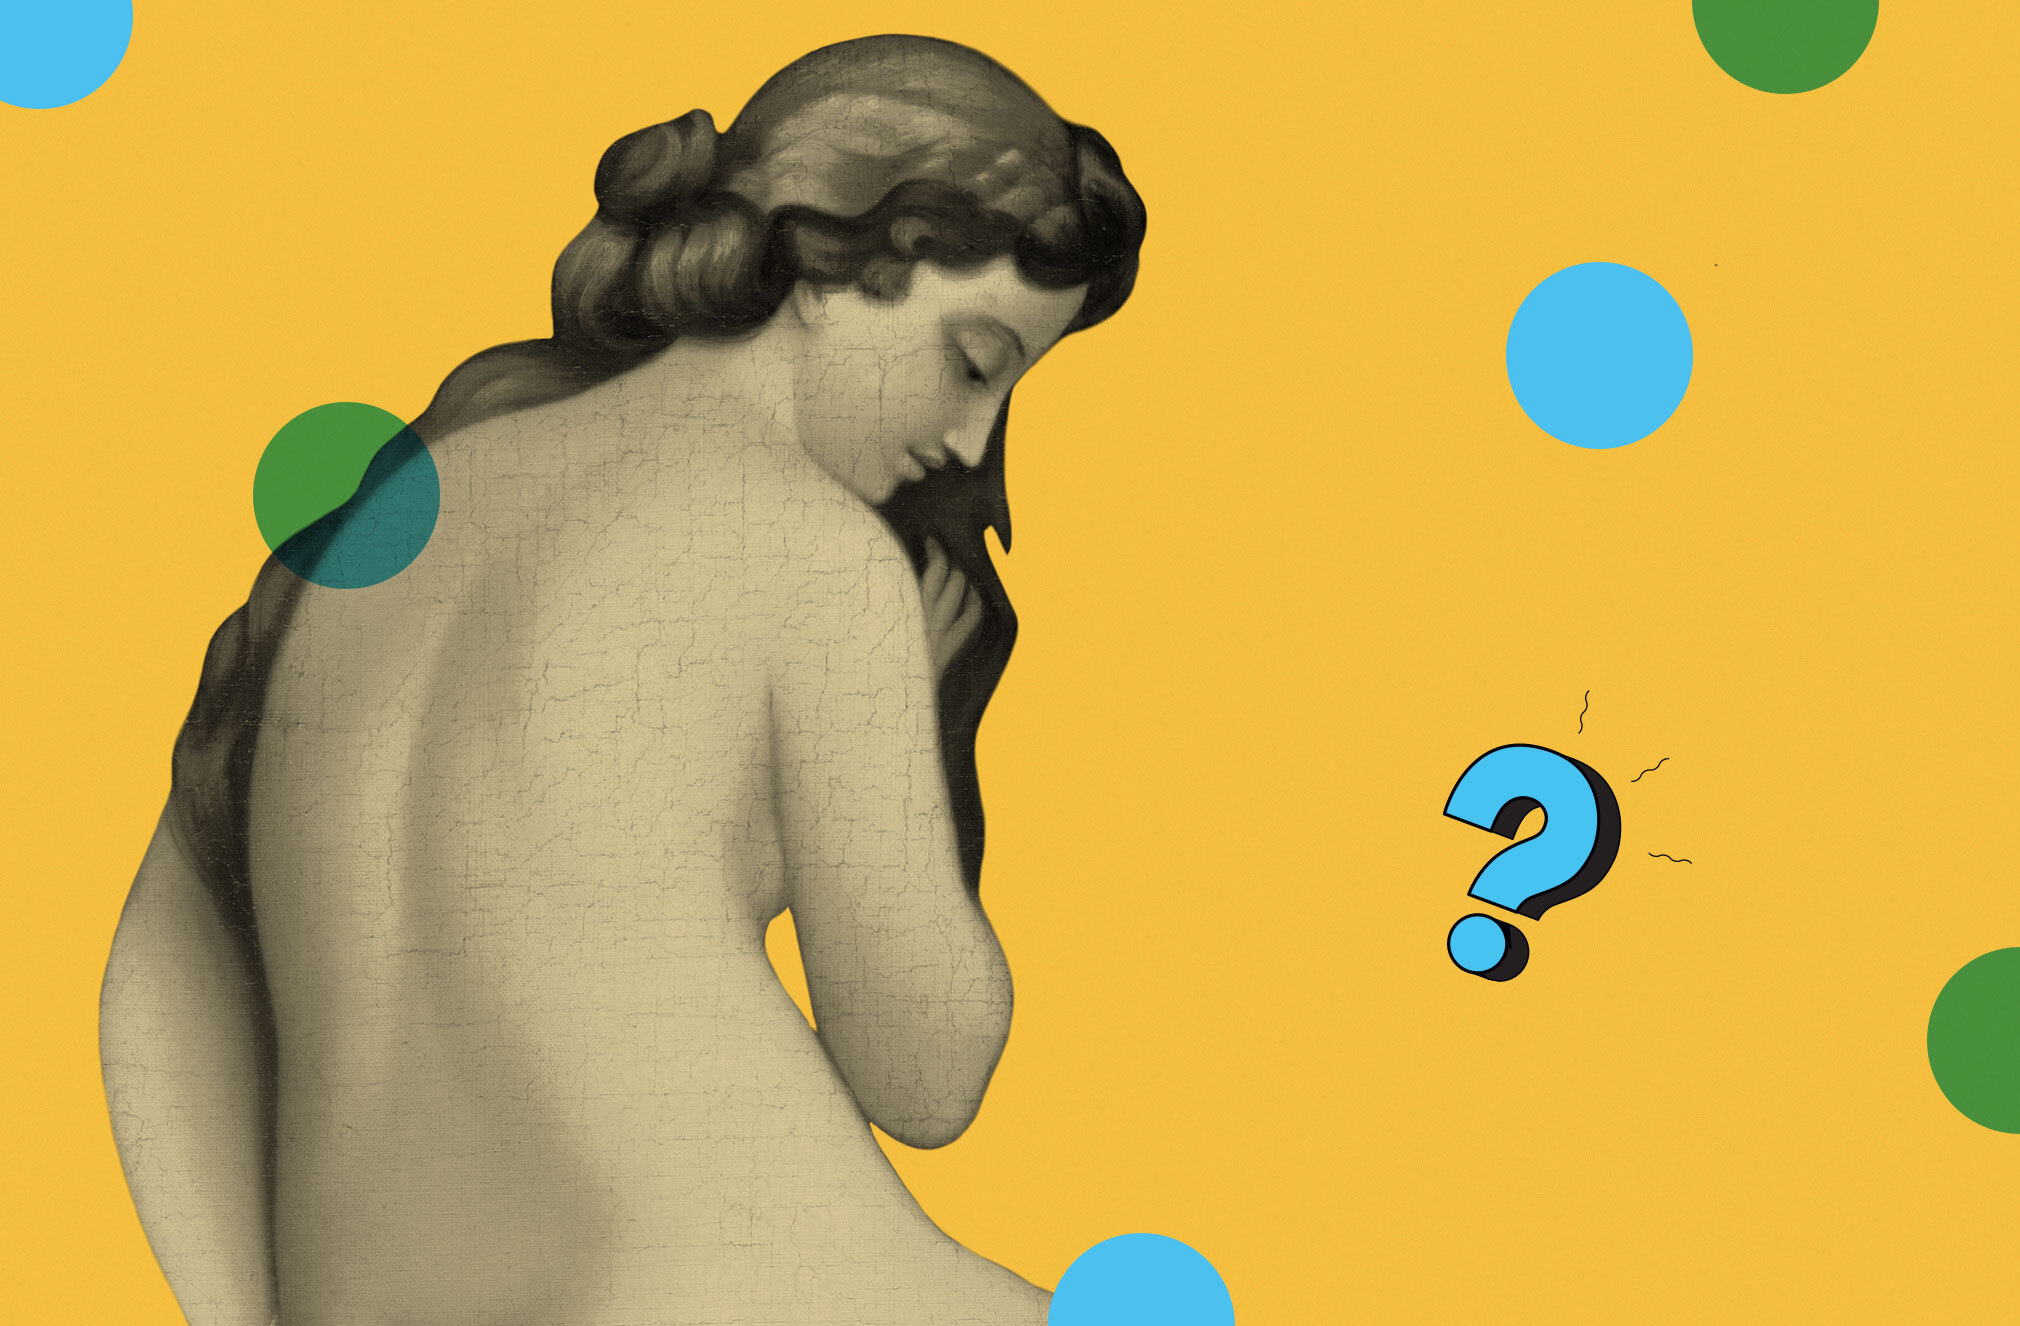 Sexual Nudist - How can you safely send nudes? | Popular Science